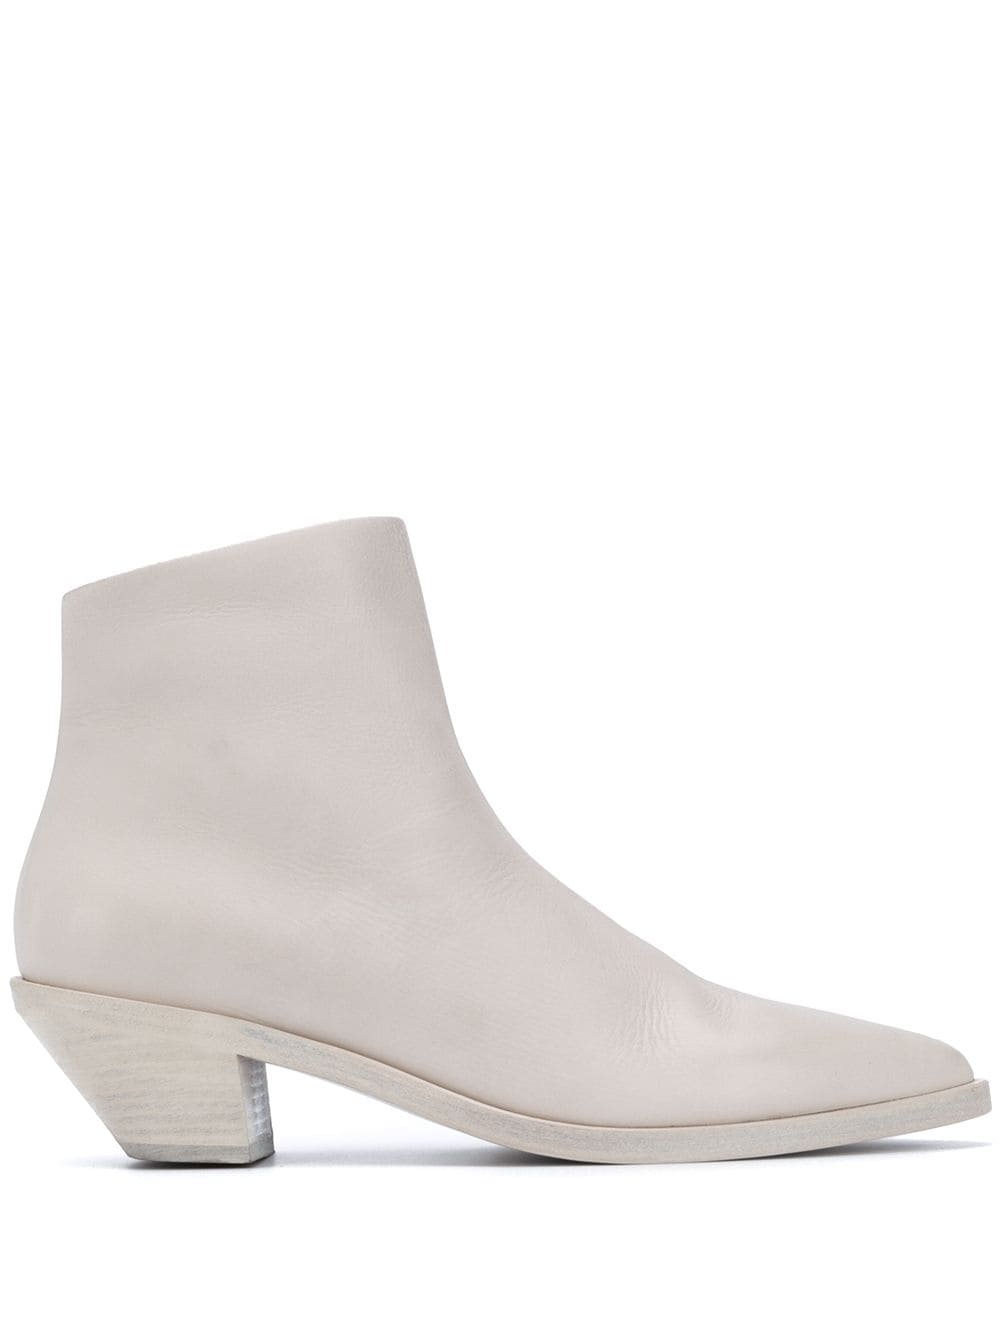 Marsèll white pointed ankle boots for 